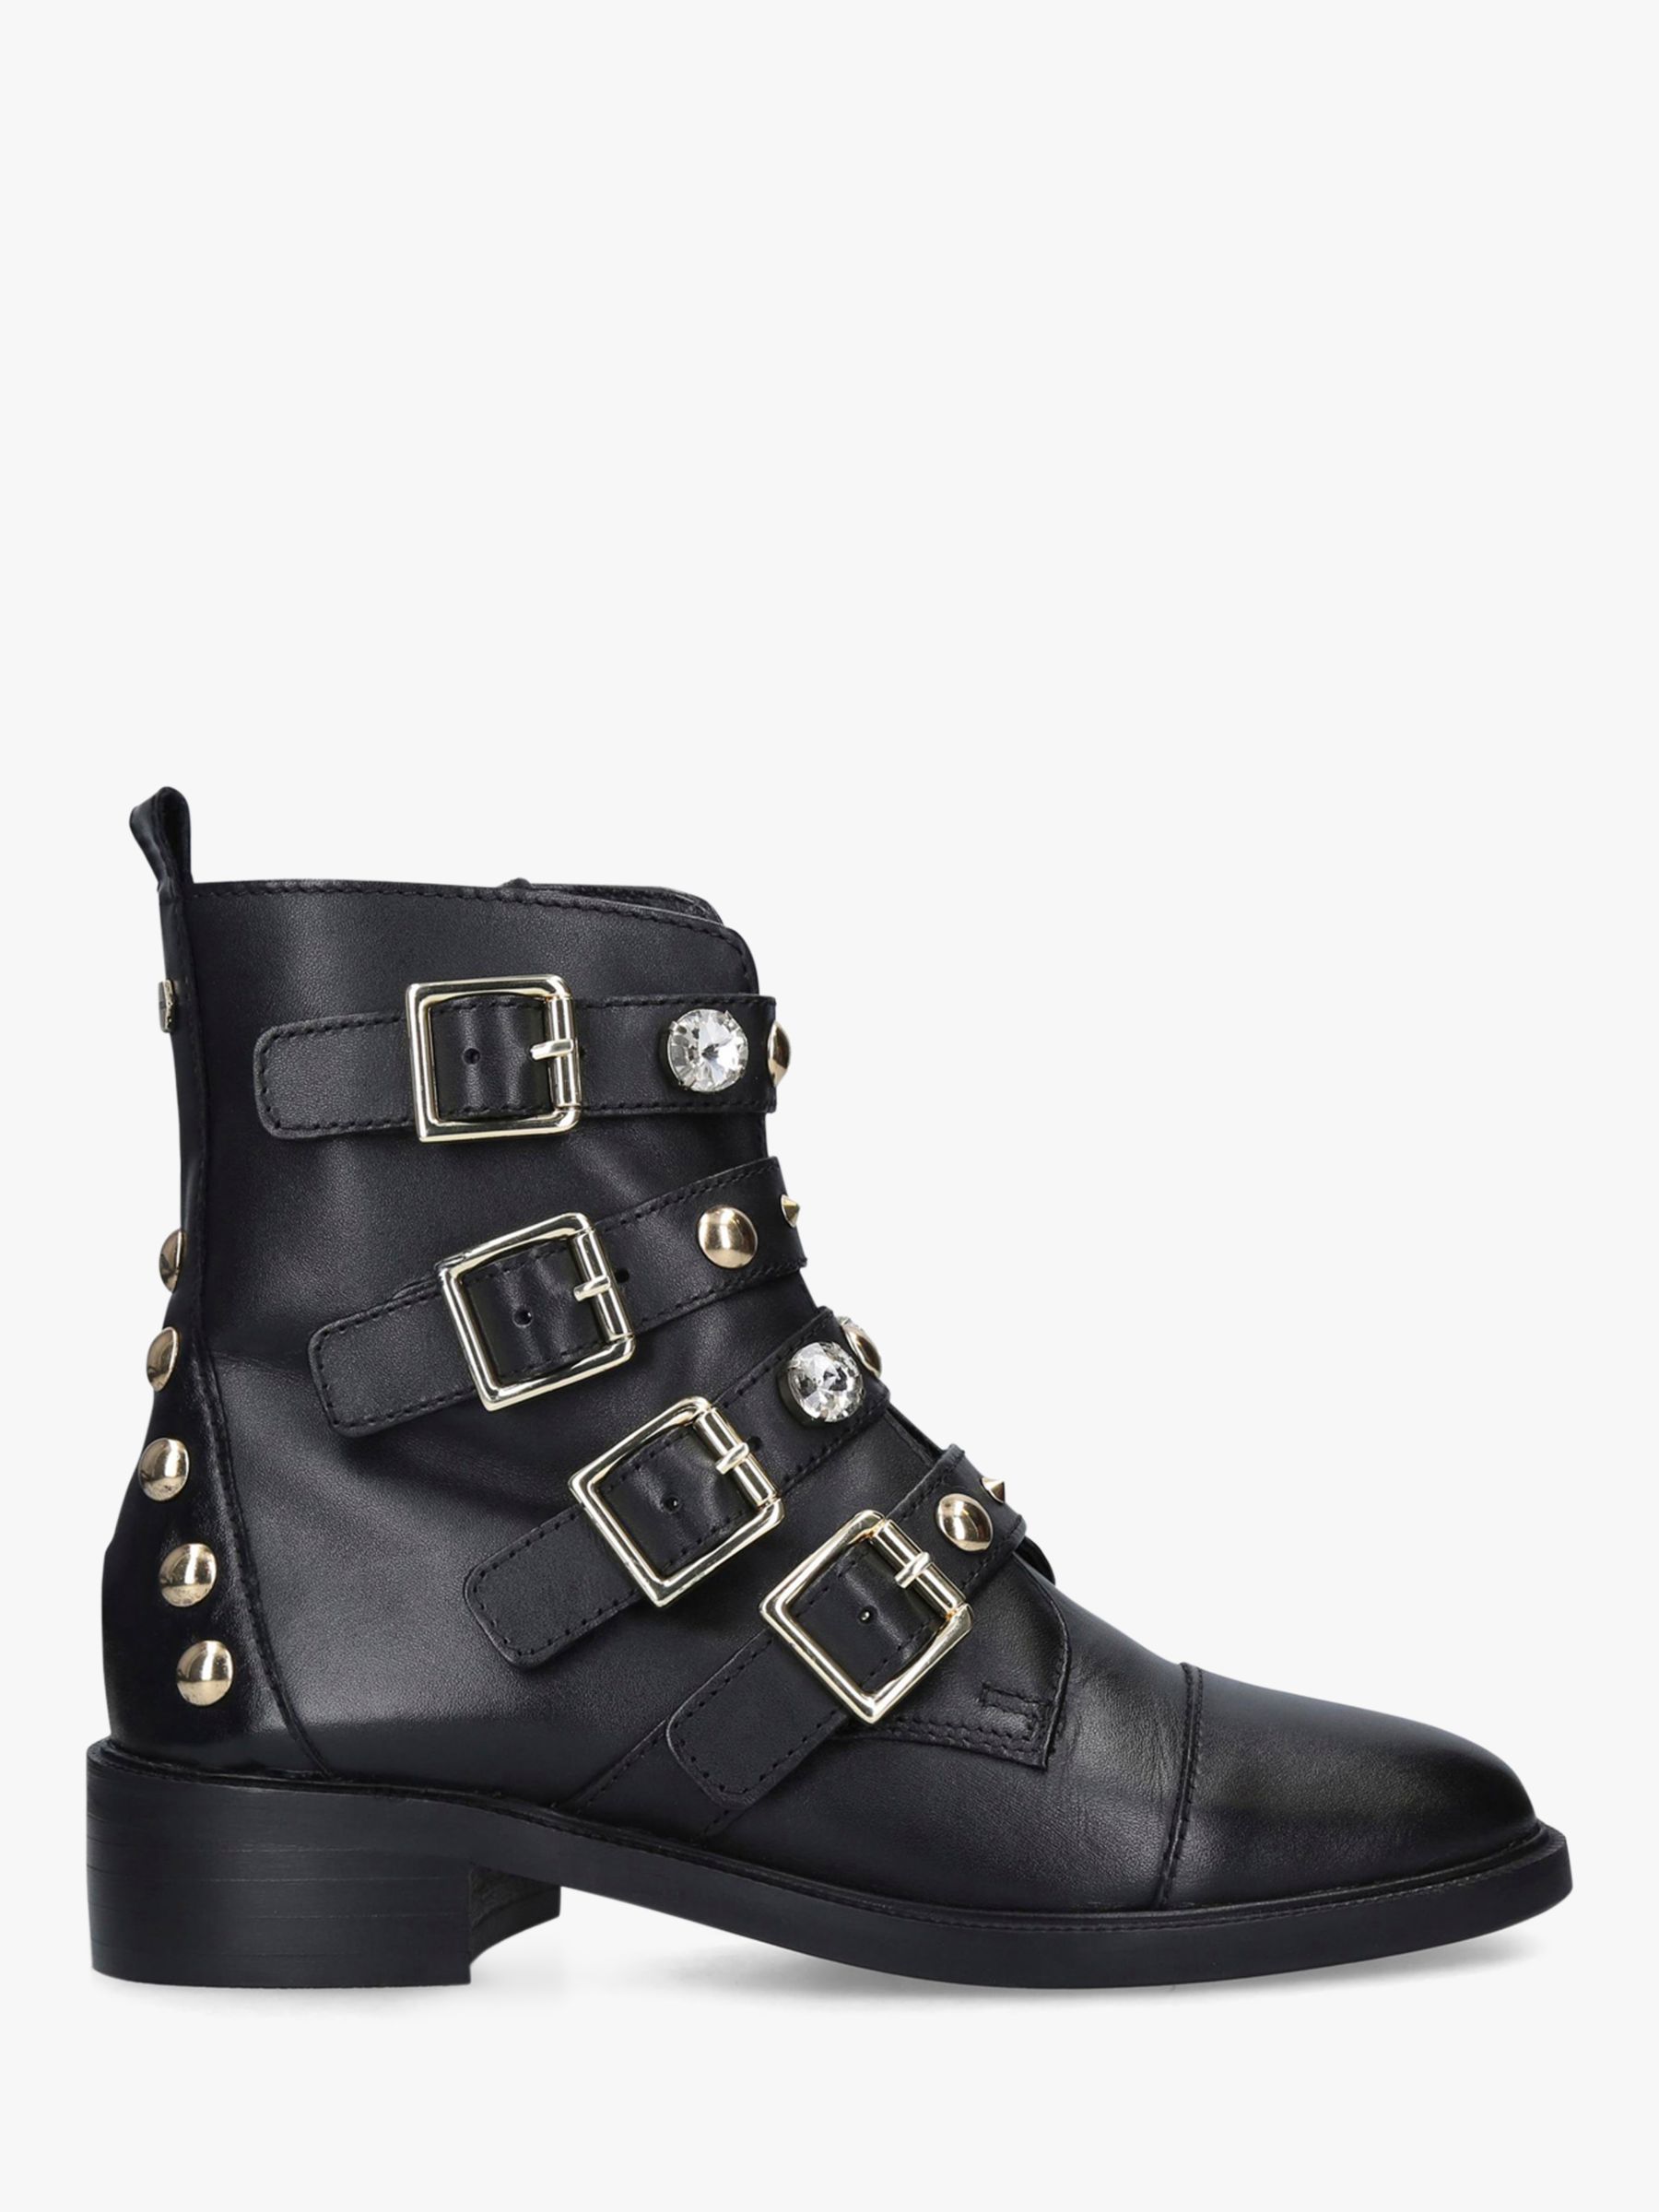 Carvela Saucy Buckle Detail Leather Ankle Boots, Black at John Lewis ...